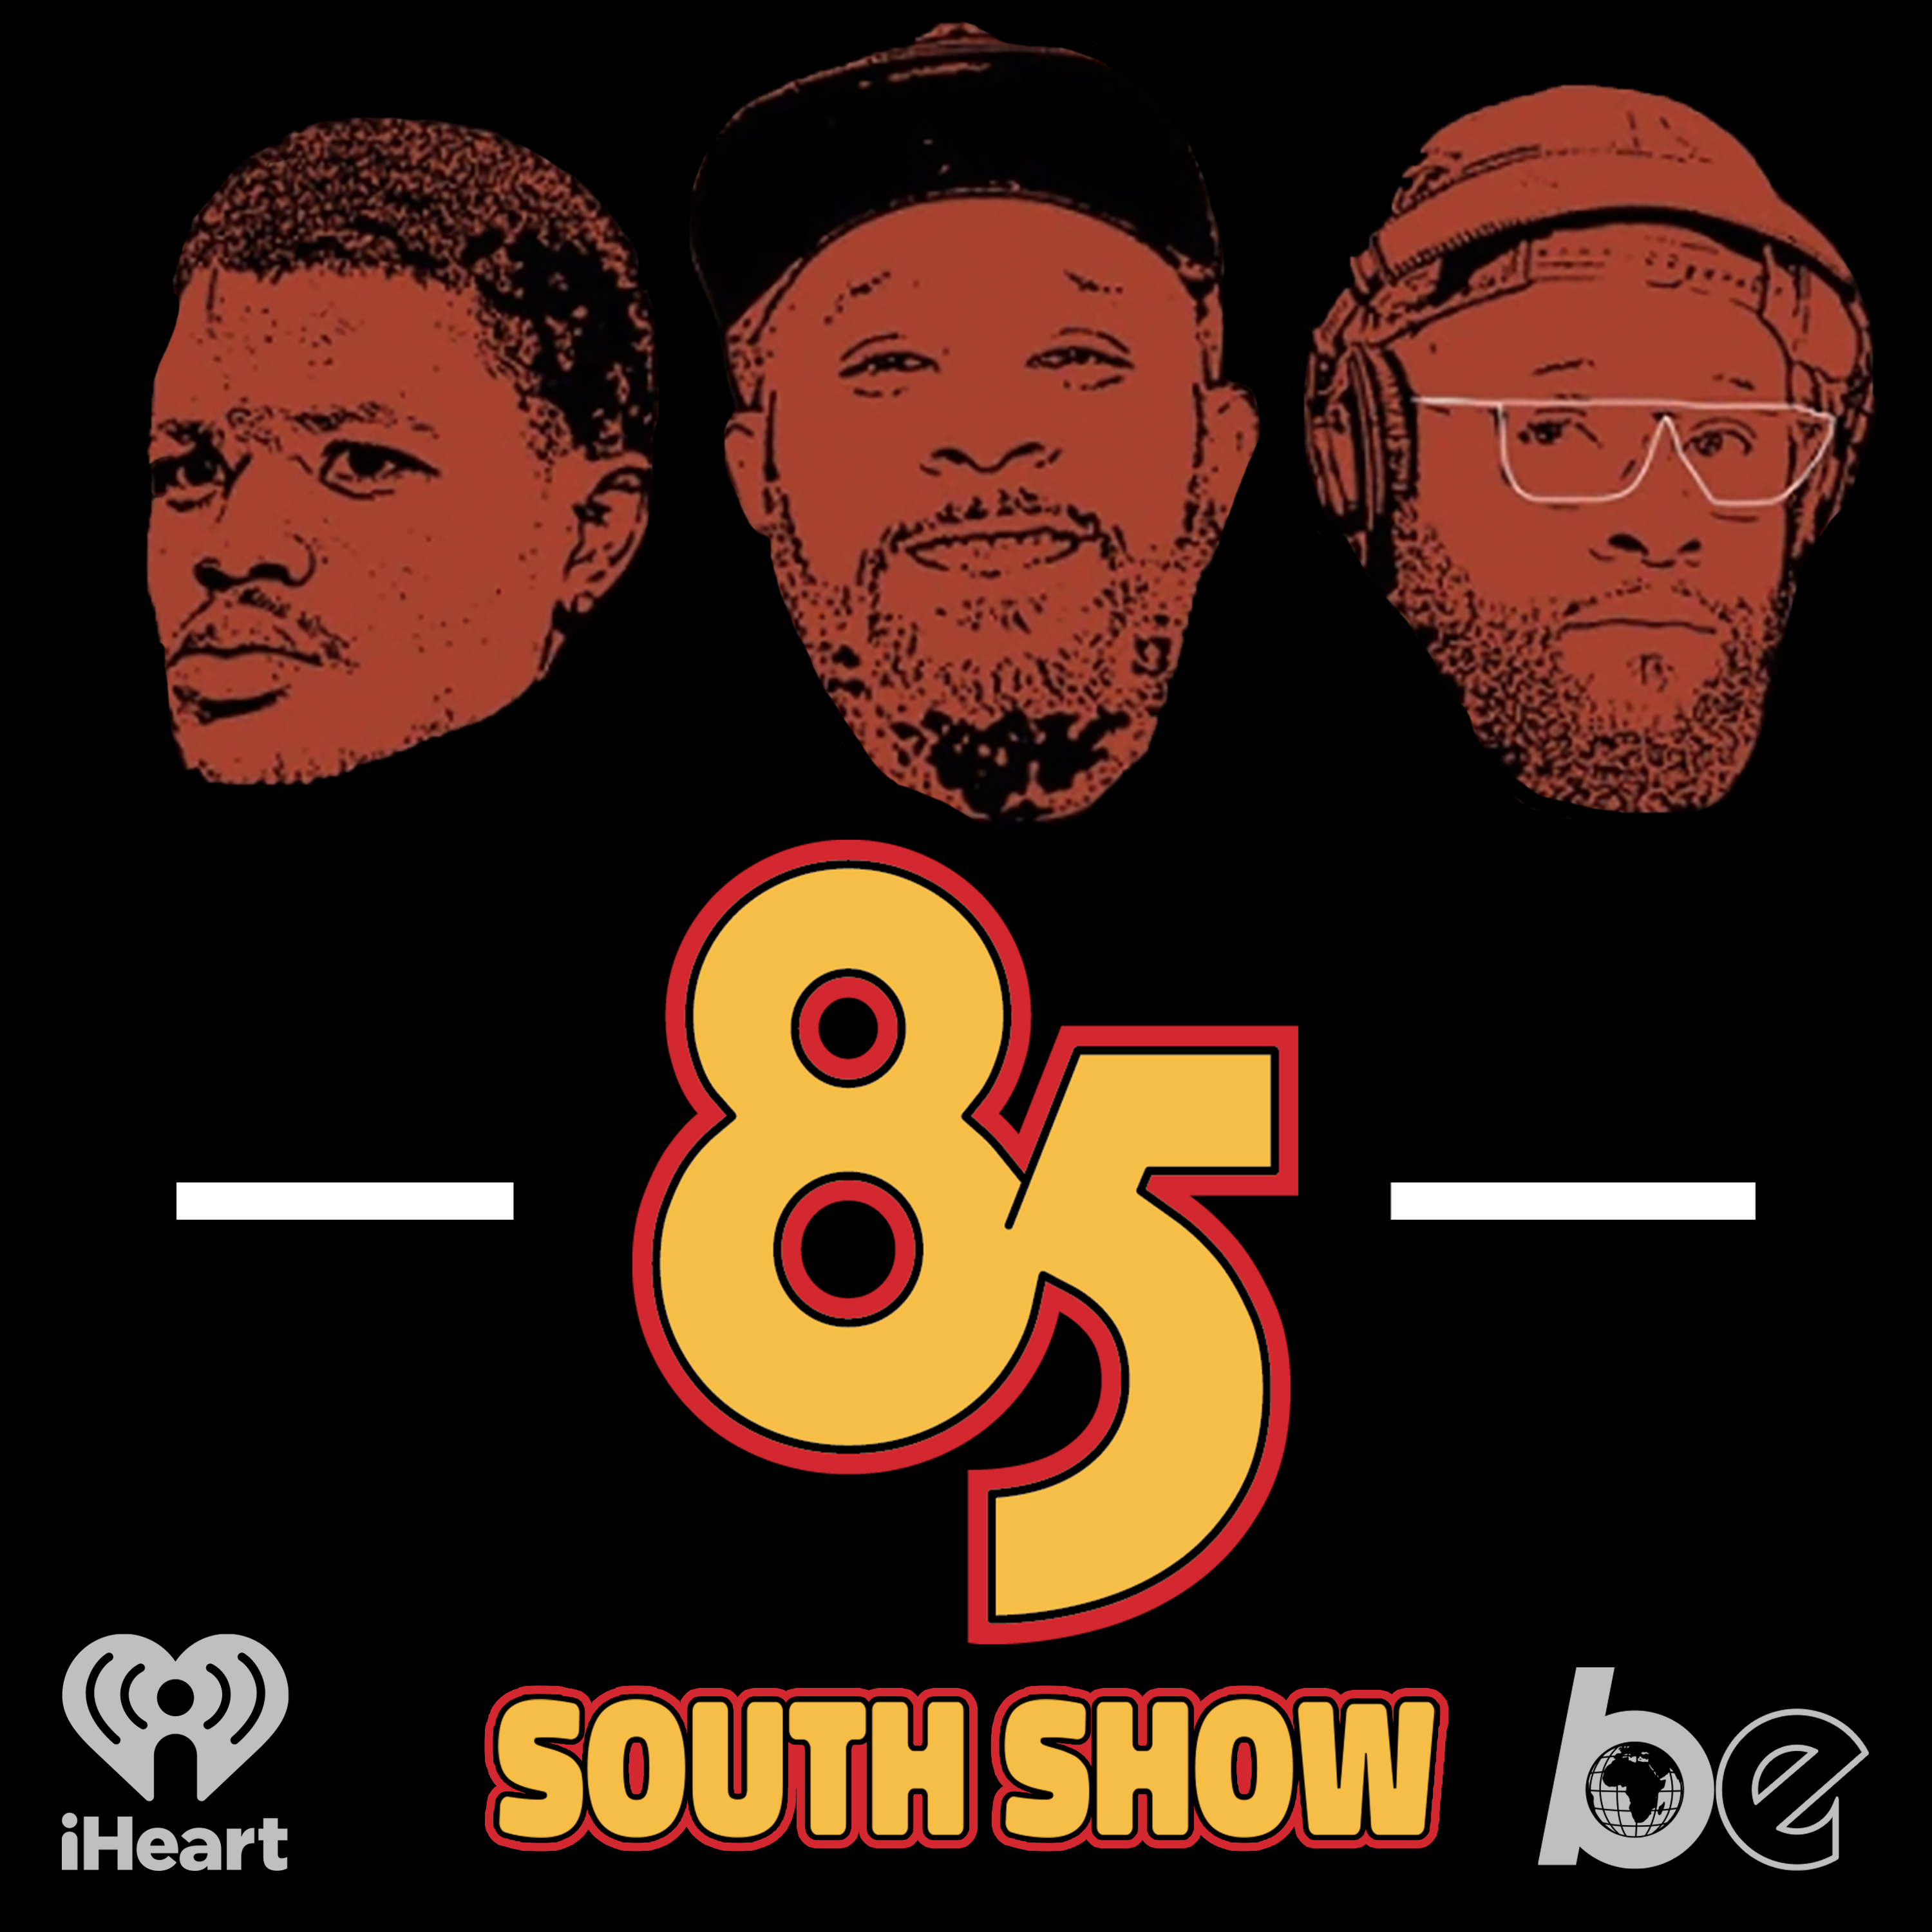 The 85 South Show: NICK CANNON in the Trap